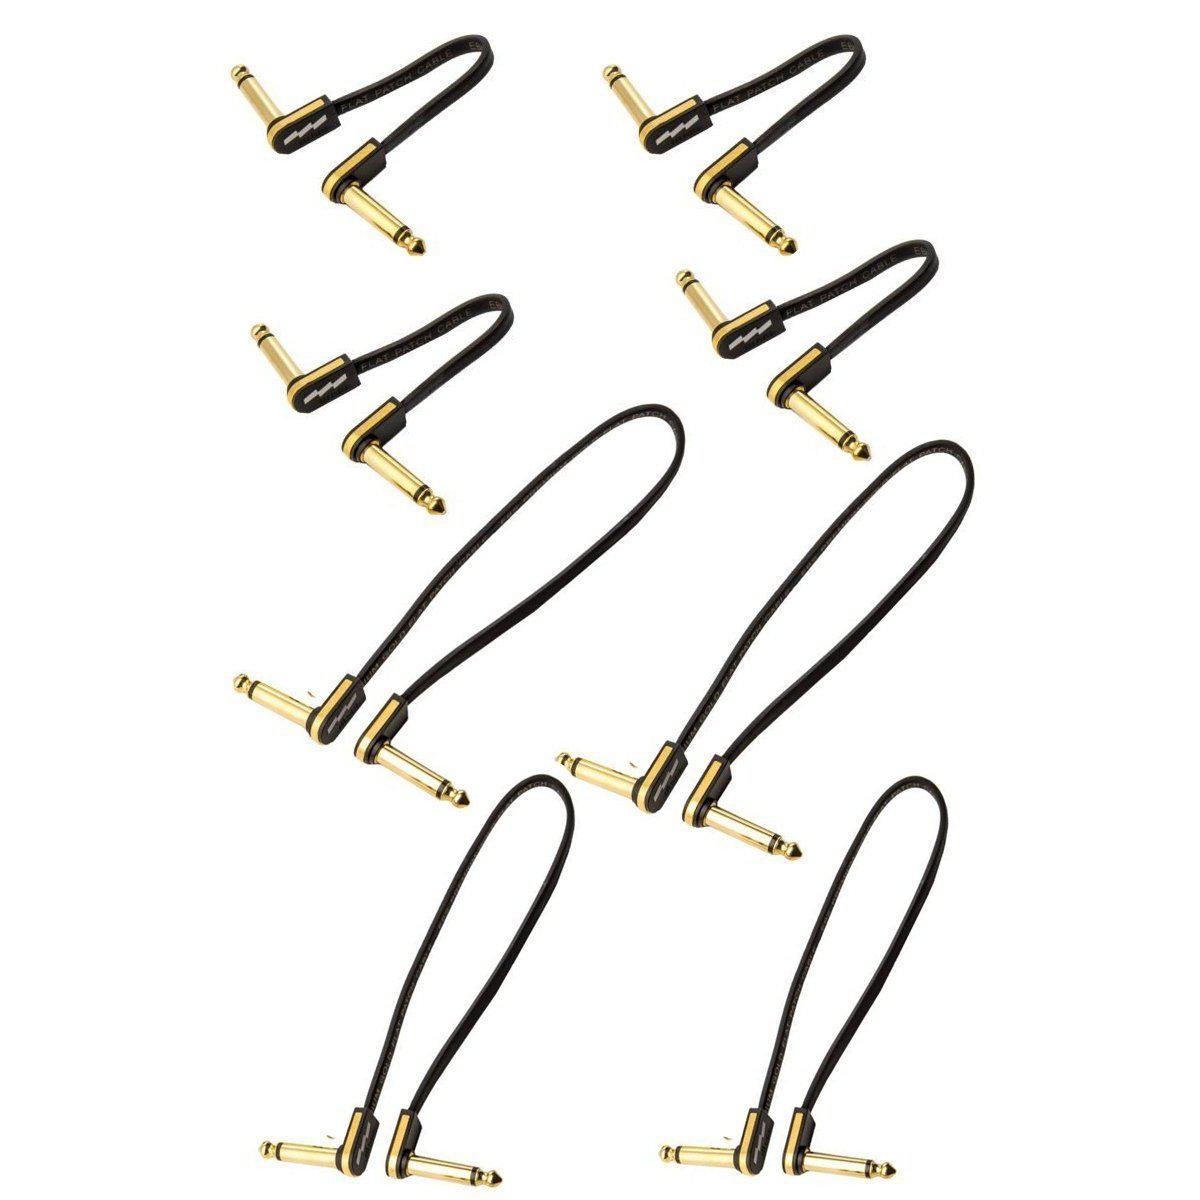 Accessories - EBS Premium Gold Flat Patch Cables Packs